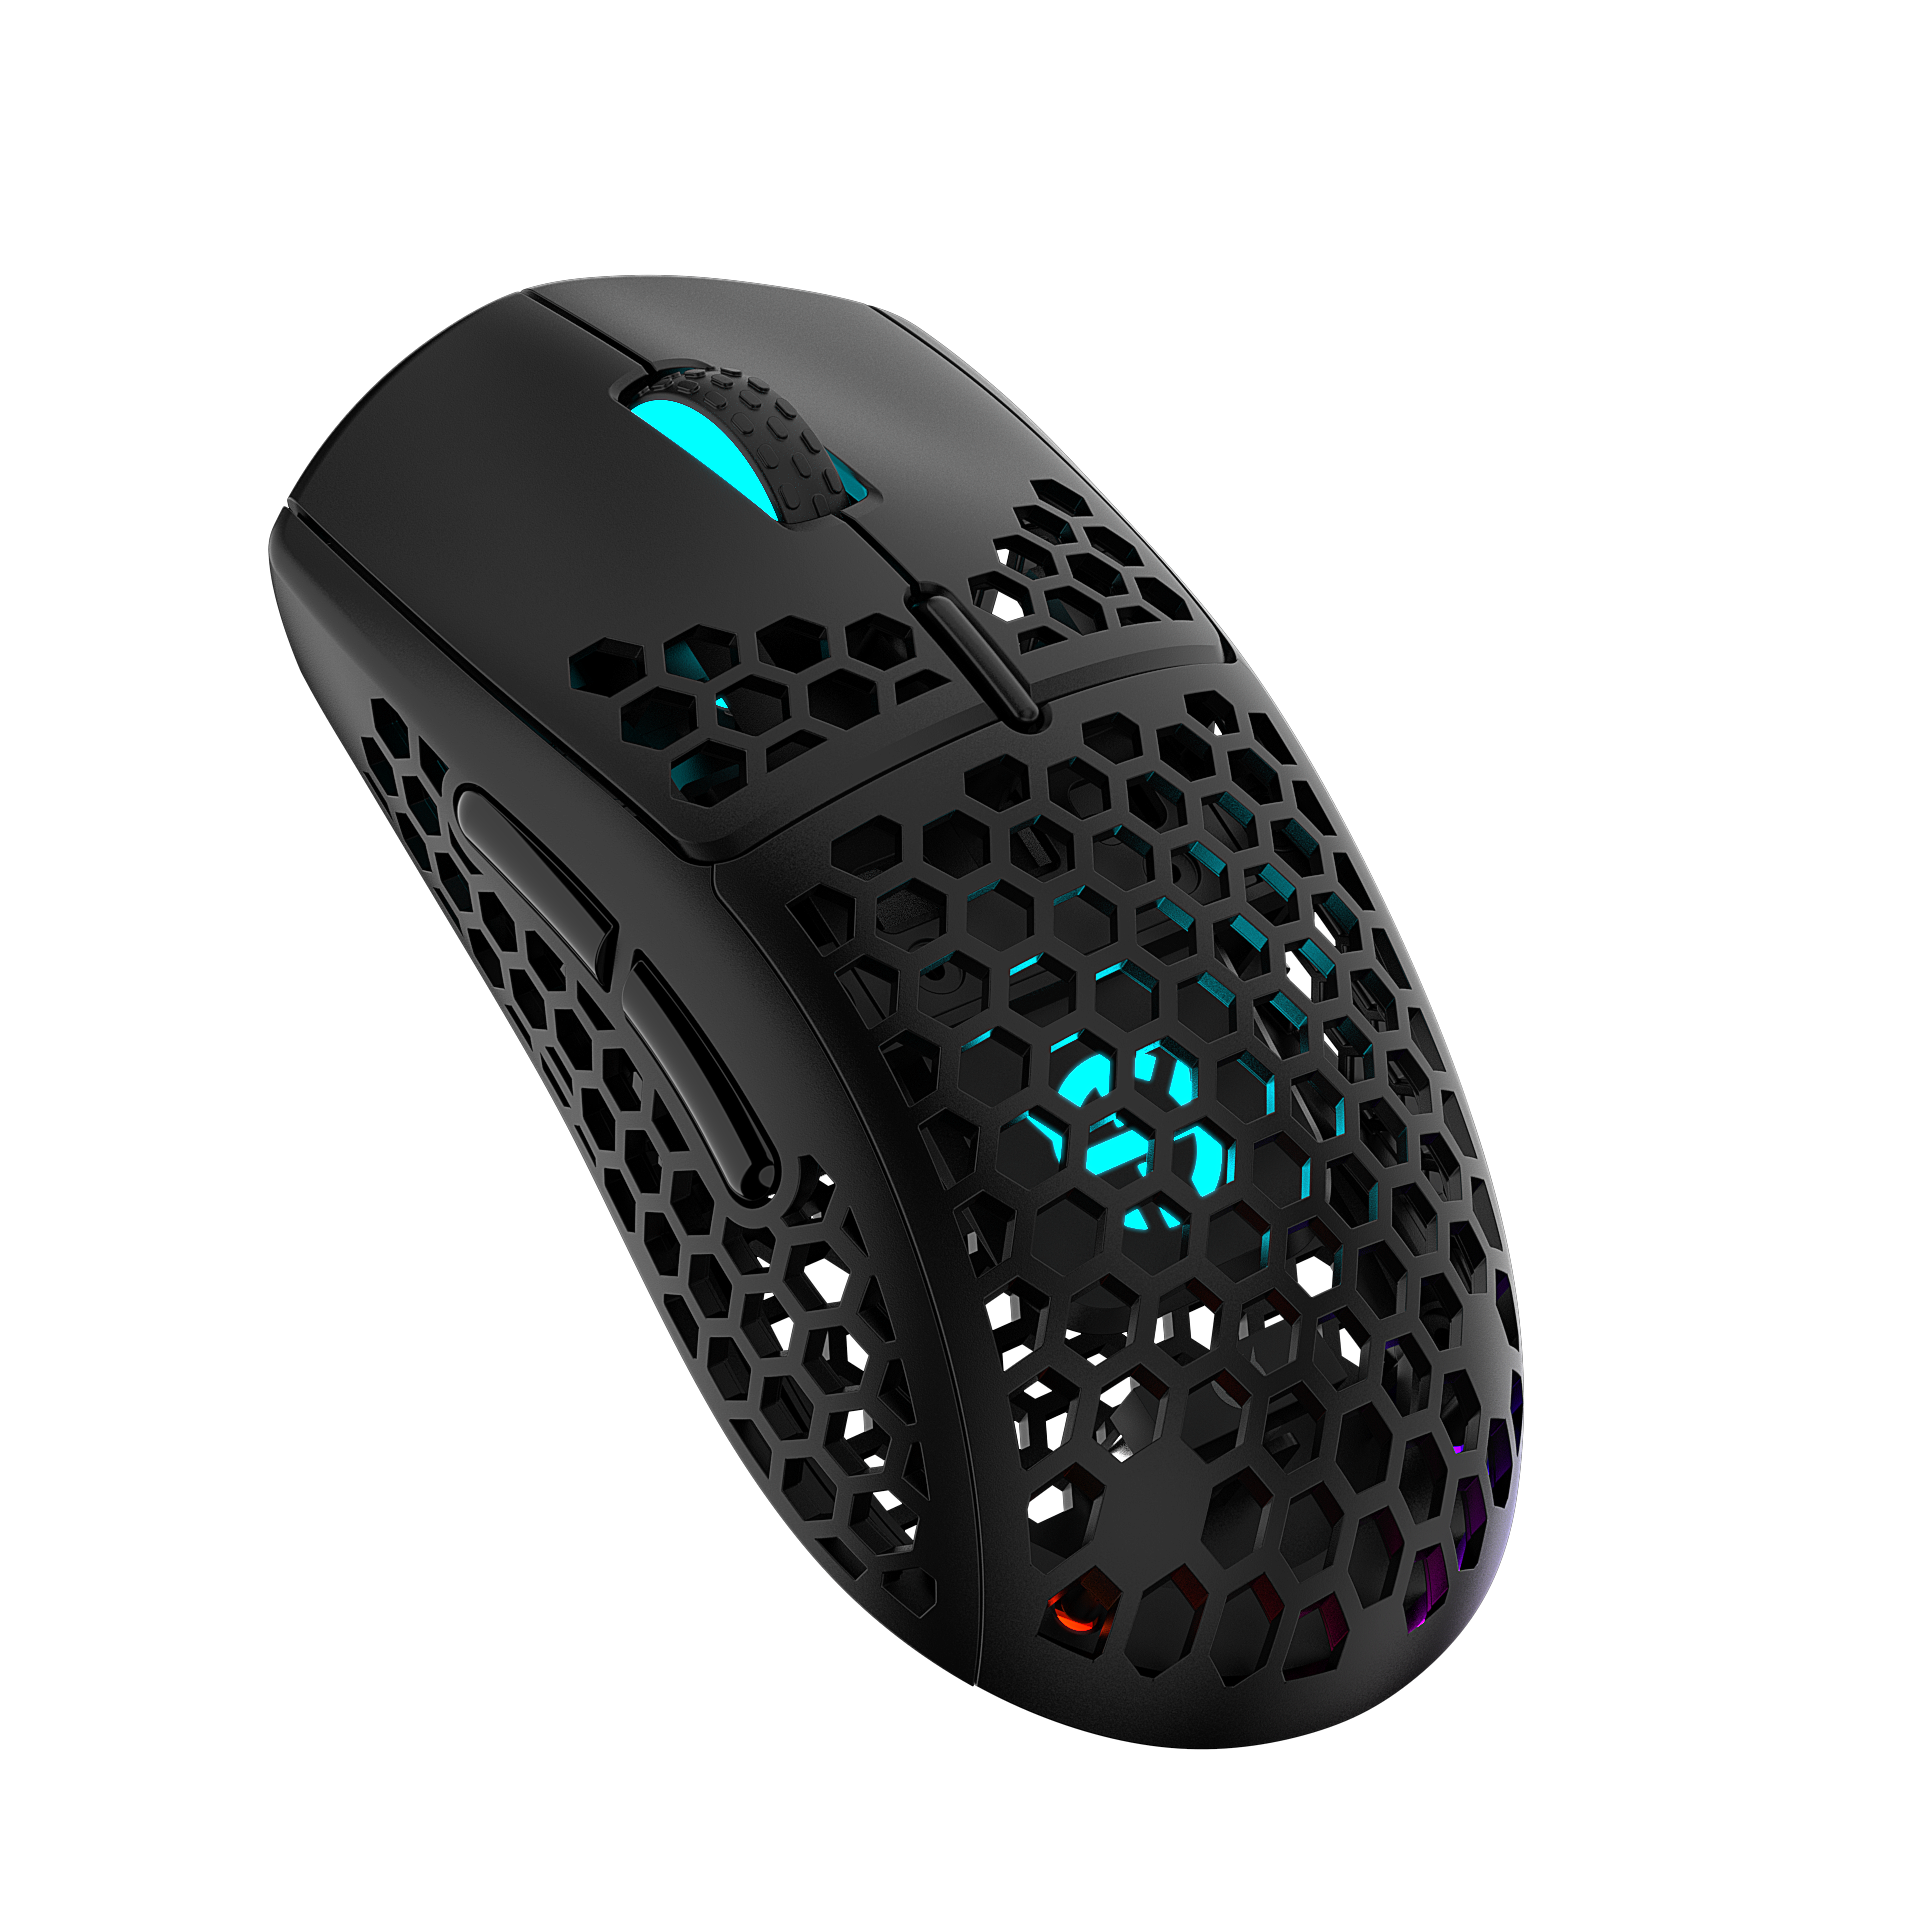 competitive gaming mouse